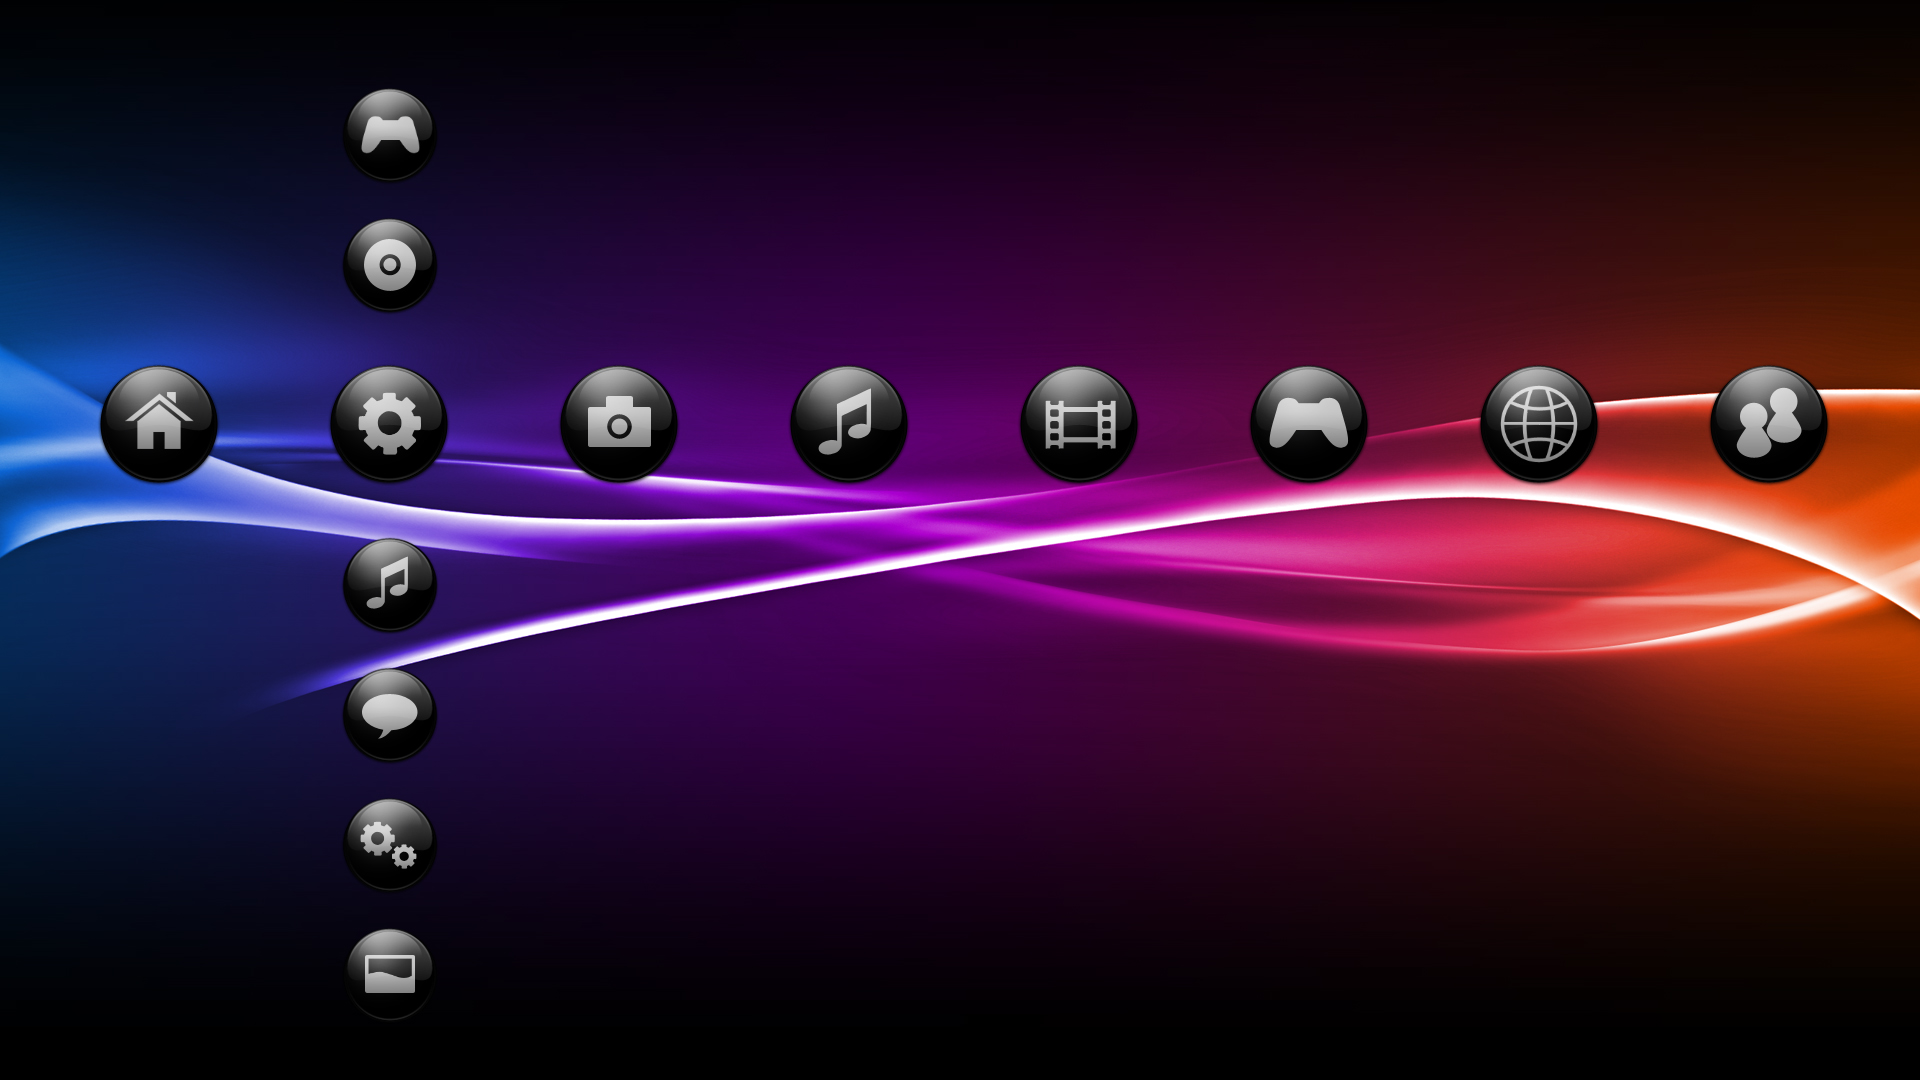 Ps3 Background Themes Image Amp Pictures Becuo